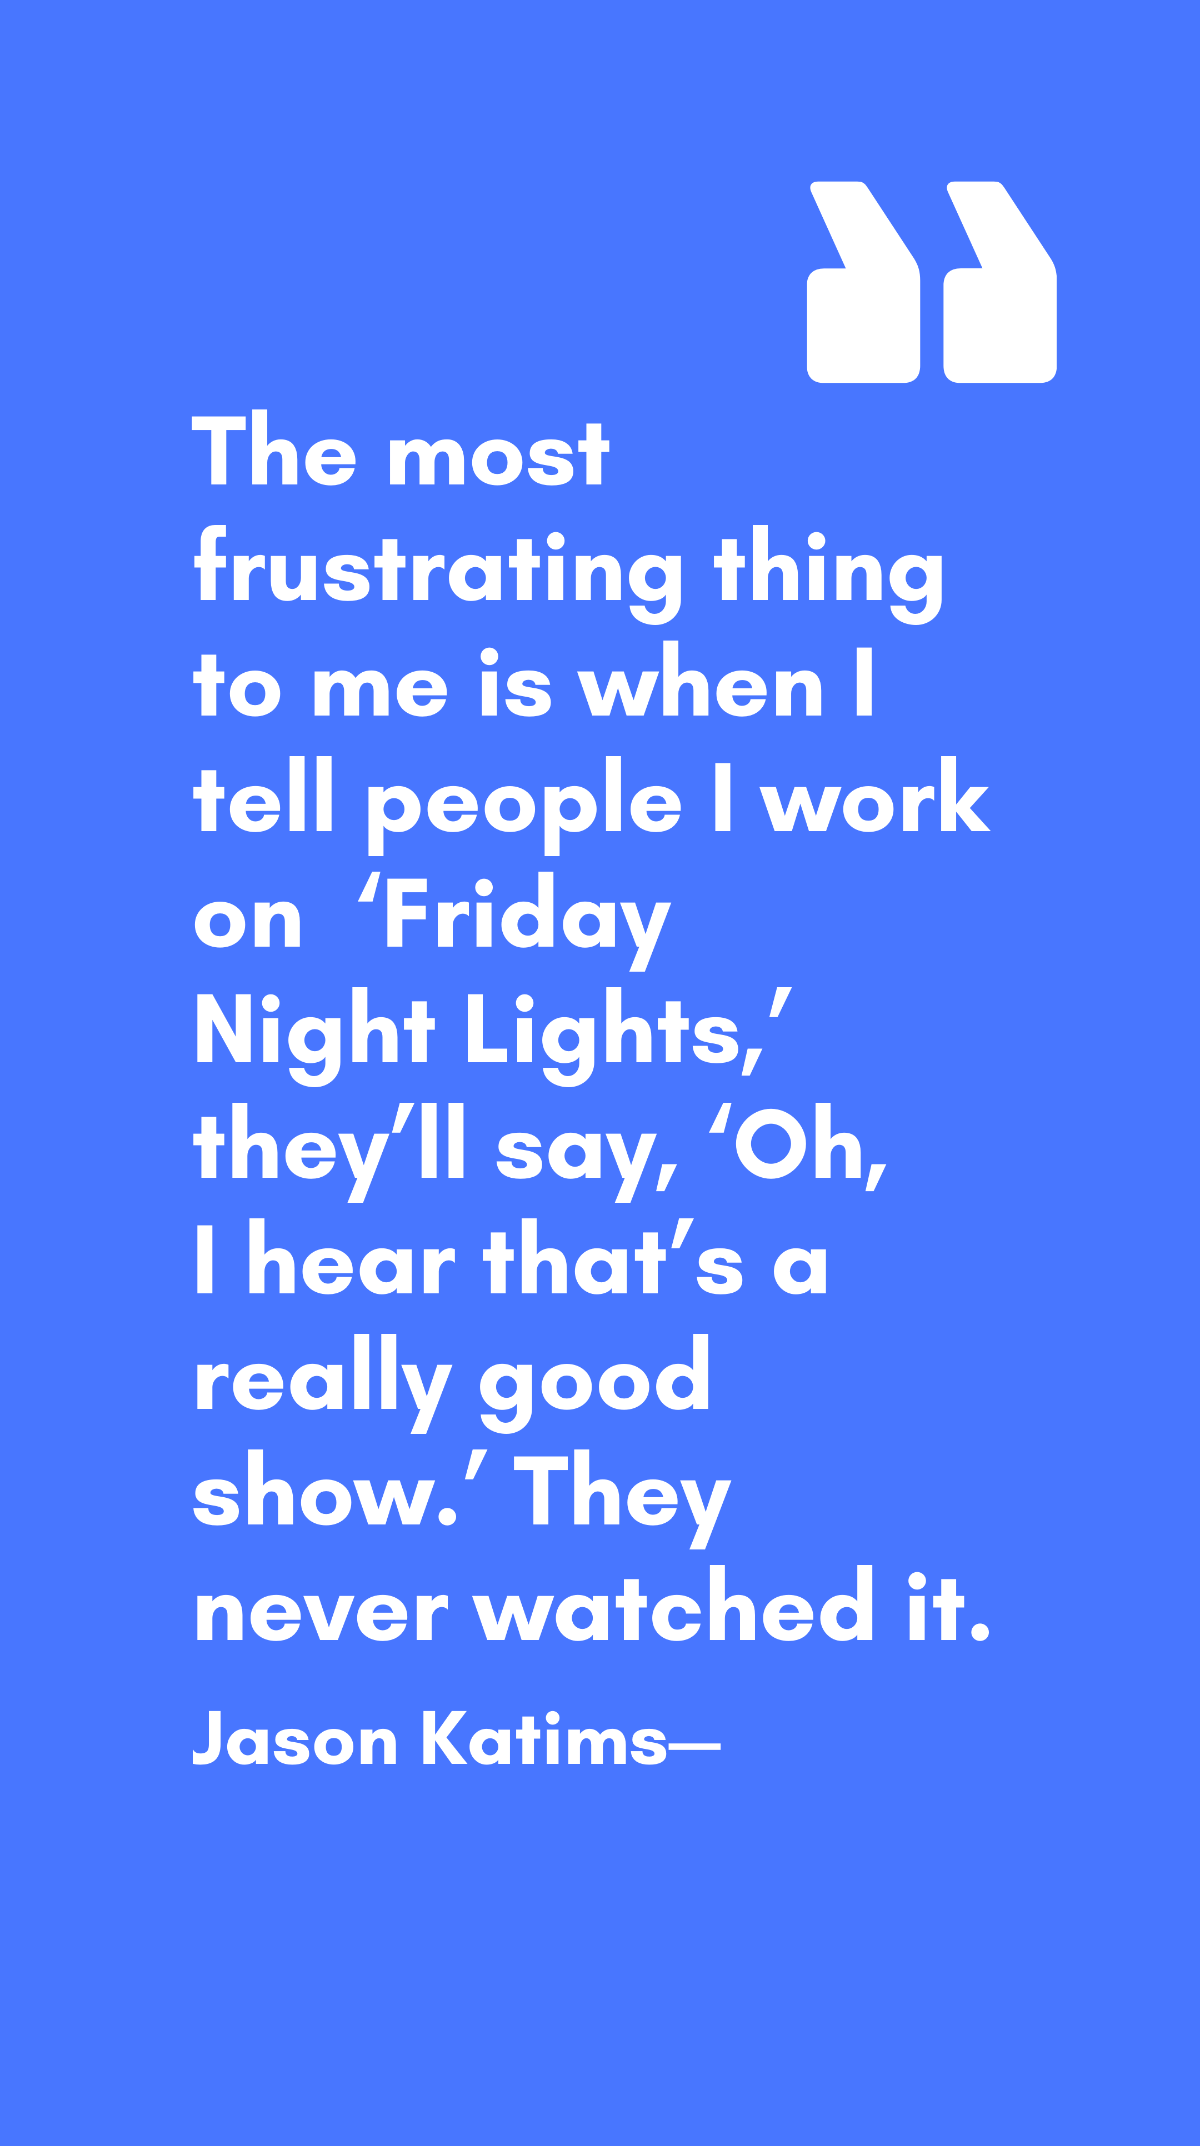 Jason Katims - The most frustrating thing to me is when I tell people I work on ‘Friday Night Lights,’ they’ll say, ‘Oh, I hear that’s a really good show.’ They never watched it. 